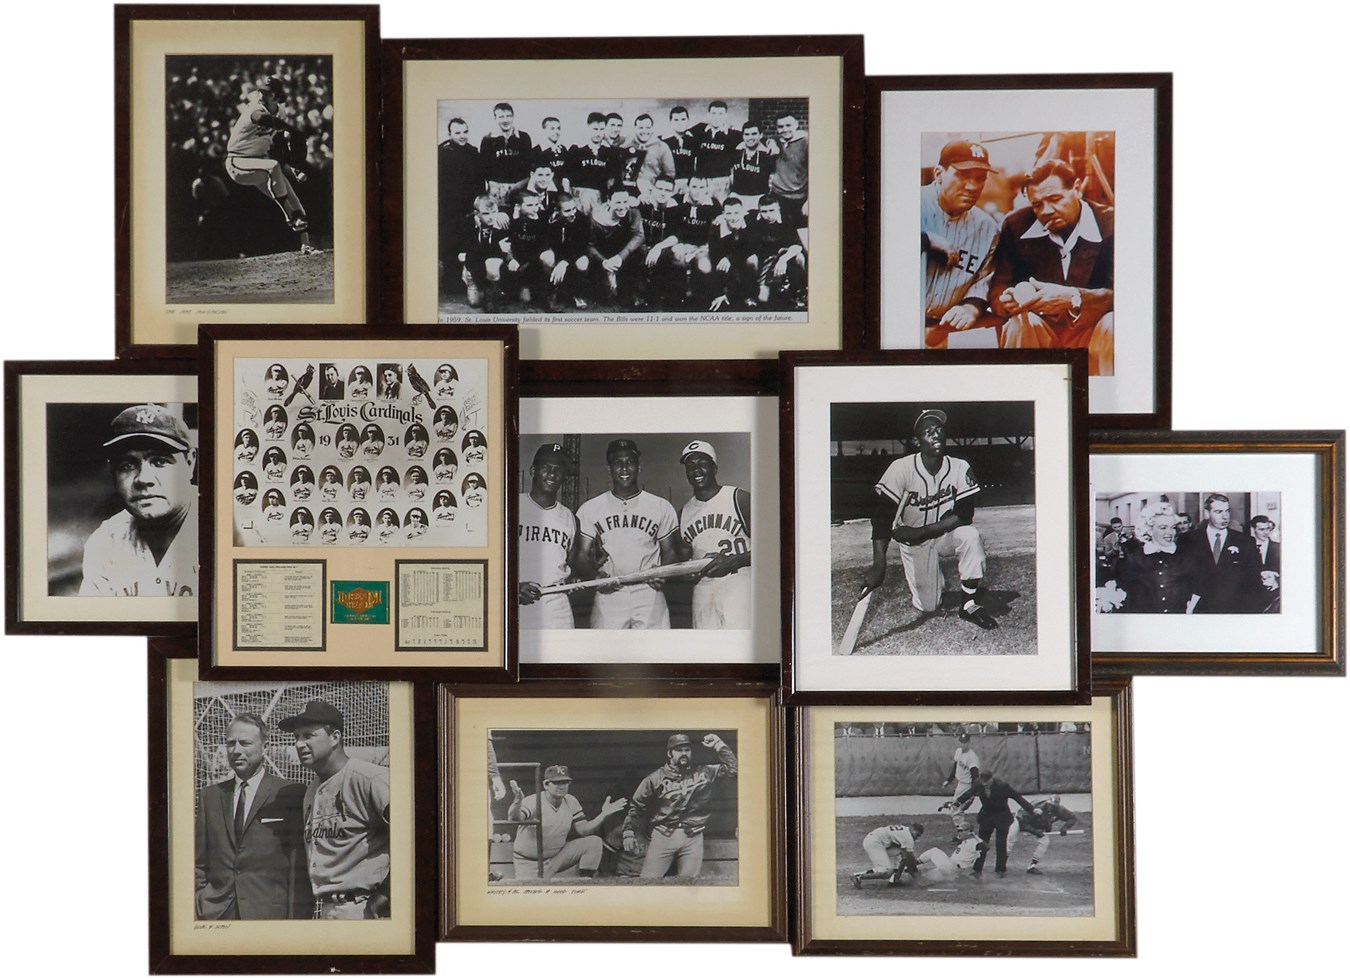 - Framed Items that Hung in Mike Shannon's Restaurant (34)